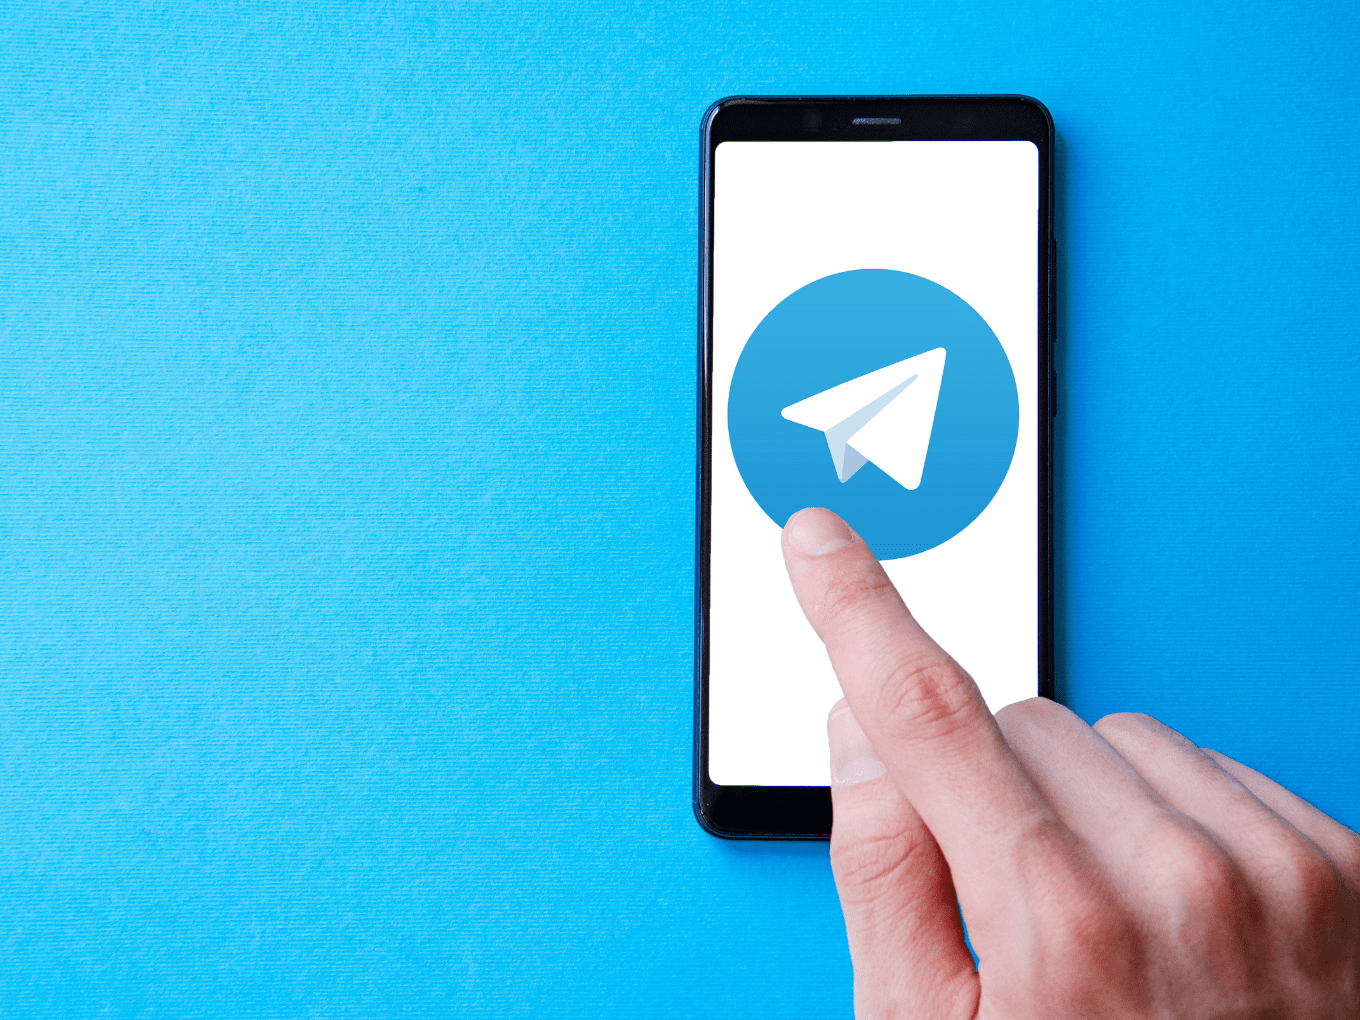 Indian Govt Opens Fact-Checking Account On Telegram To Fight Fake News